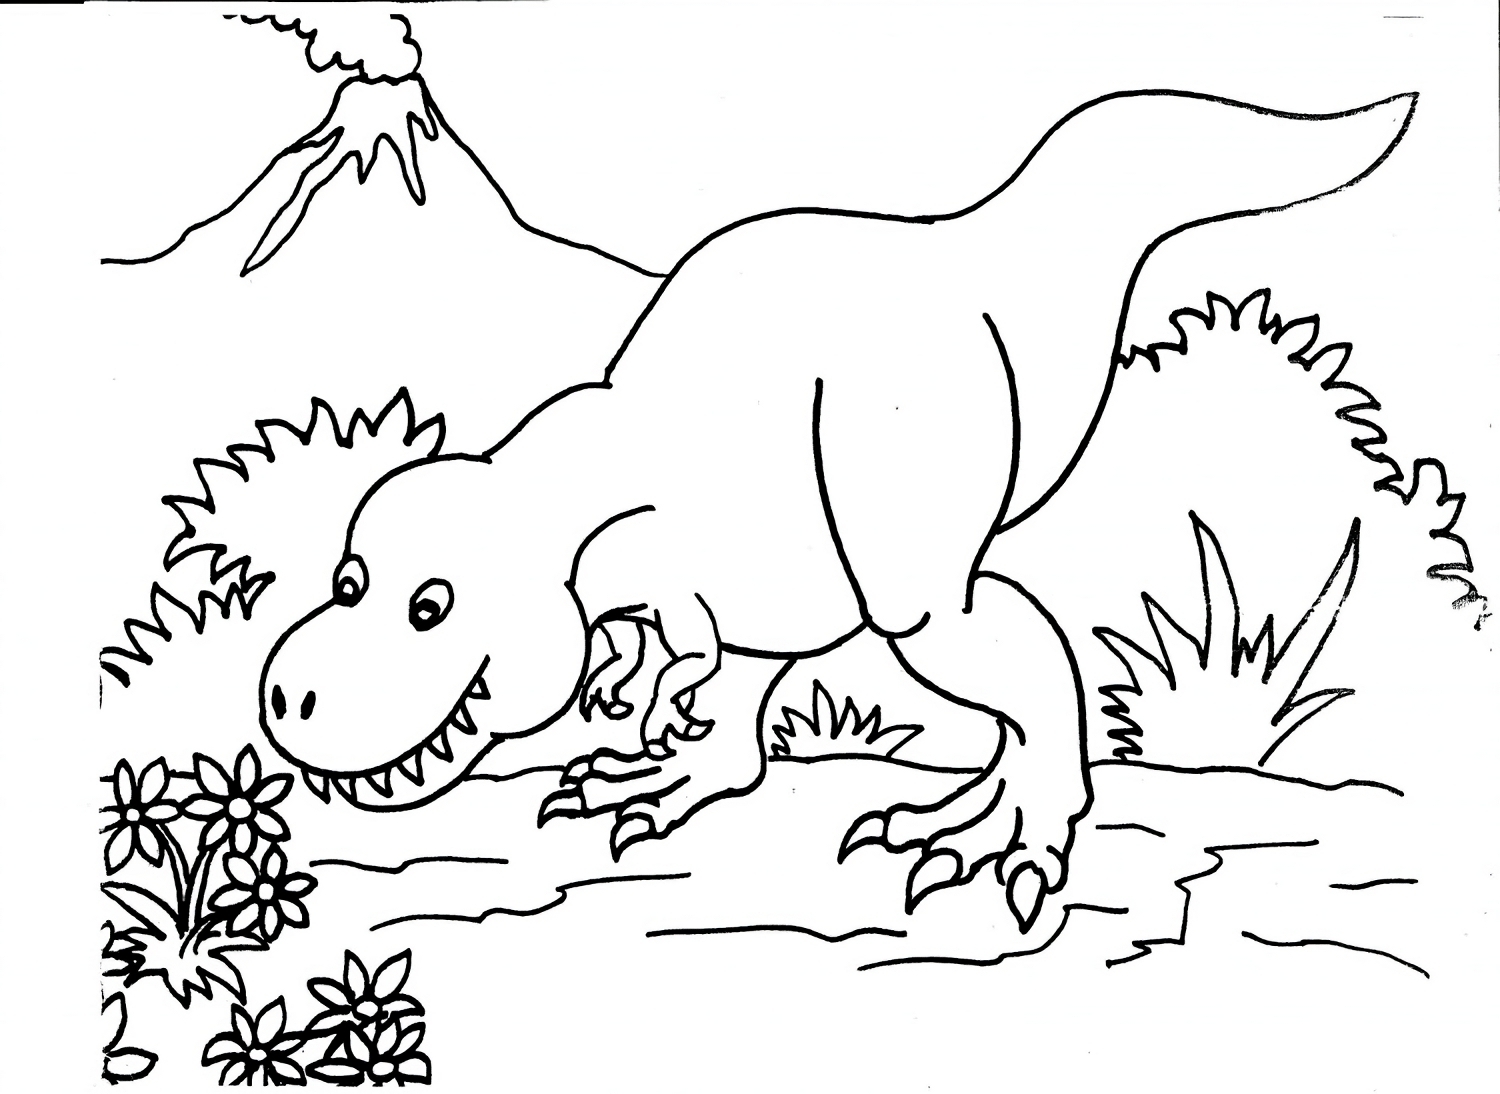 Gallery For Jurassic Park T Rex Coloring Pages Jurassic Park 